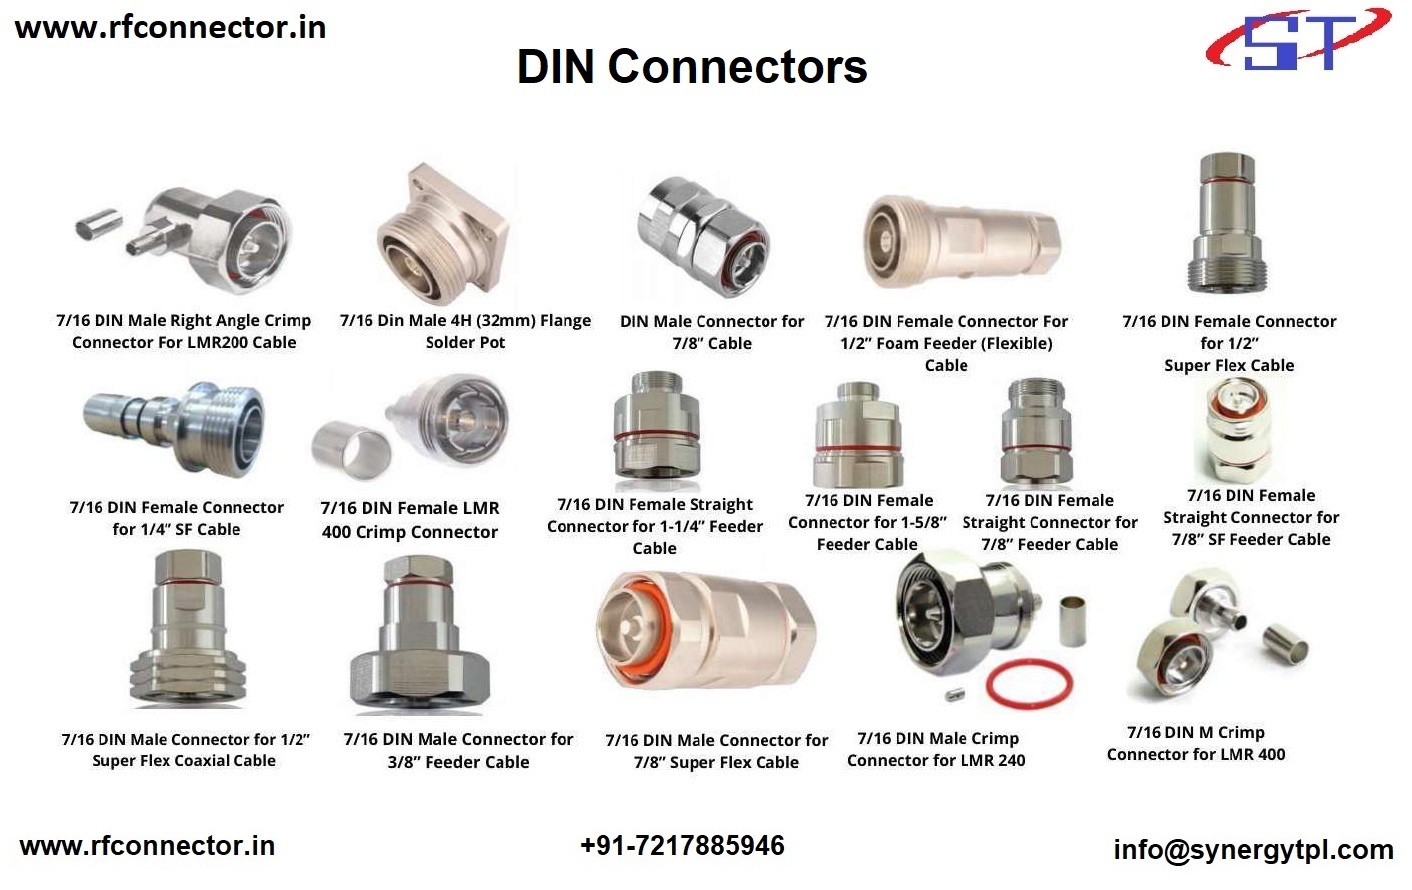 DIN MALE 1-4 SUPERFLEX CLAMP CONNECTOR